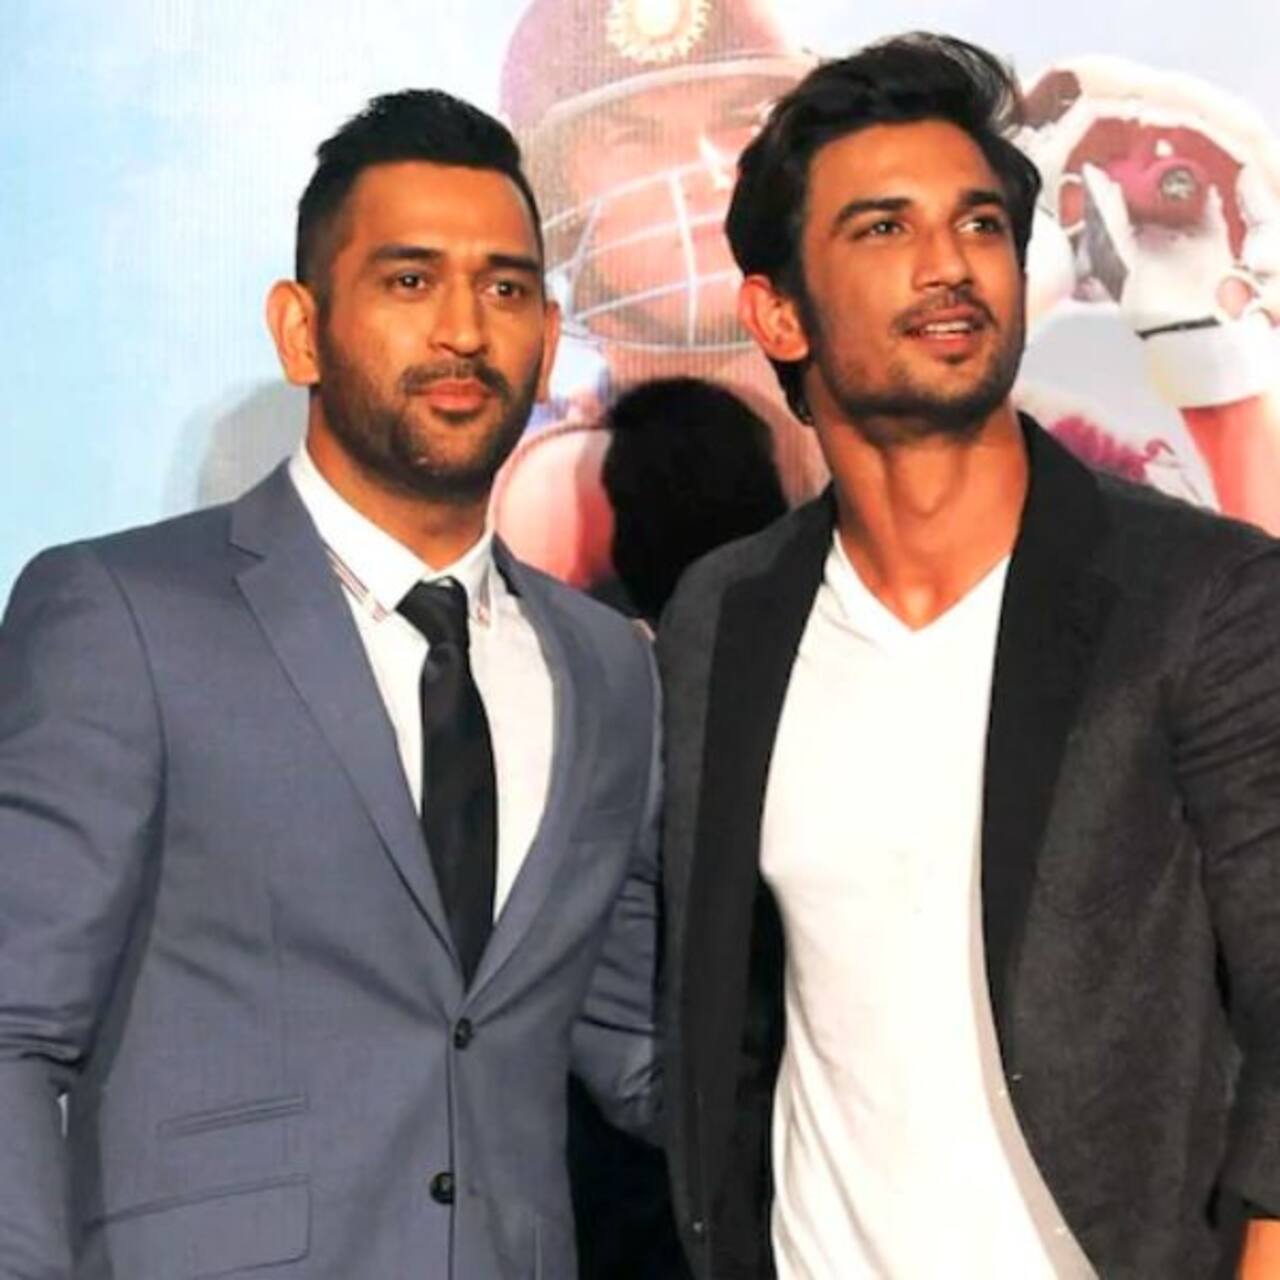 When MS Dhoni told Sushant Singh Rajput, ‘You ask too many questions’